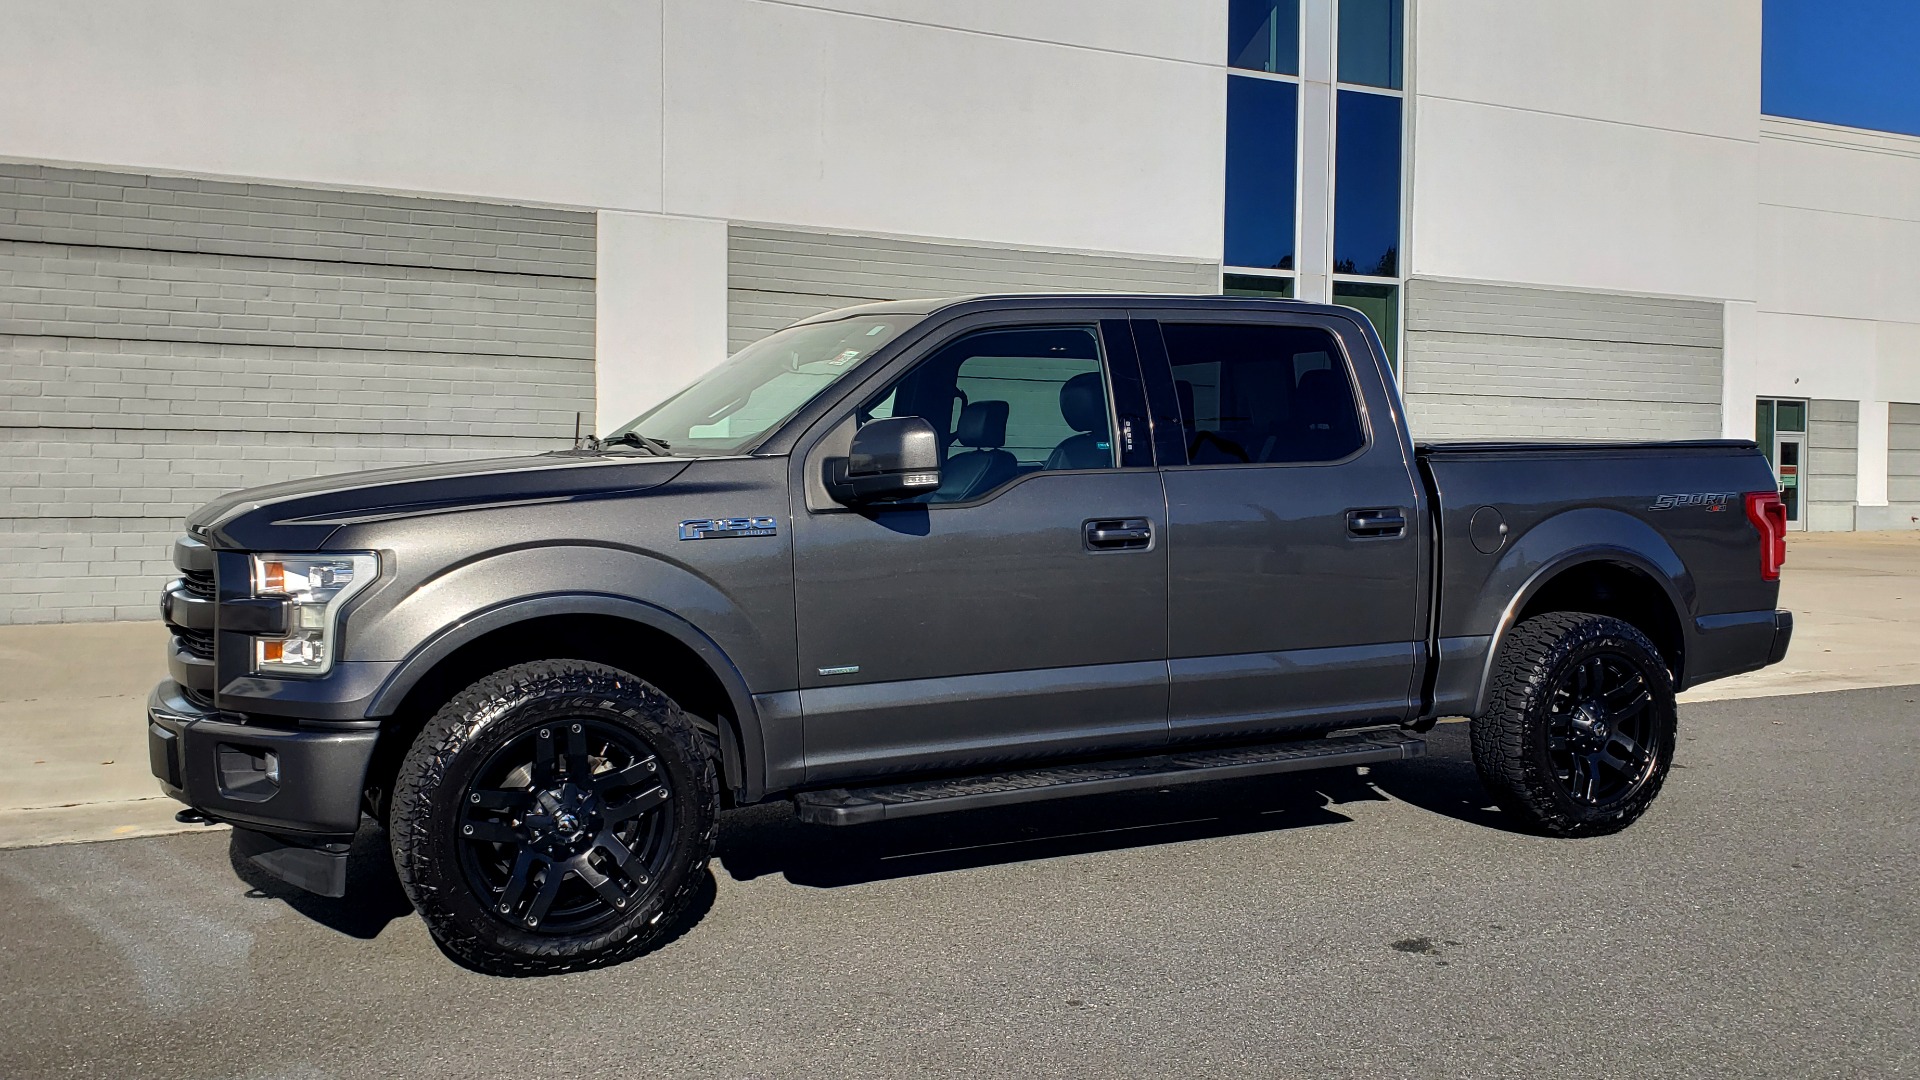 Used 2017 Ford F-150 LARIAT 4X4 SUPERCREW / 3.5L ECOBOOST / 10-SPD AUTO / NAV / SONY / REARVIEW for sale Sold at Formula Imports in Charlotte NC 28227 3